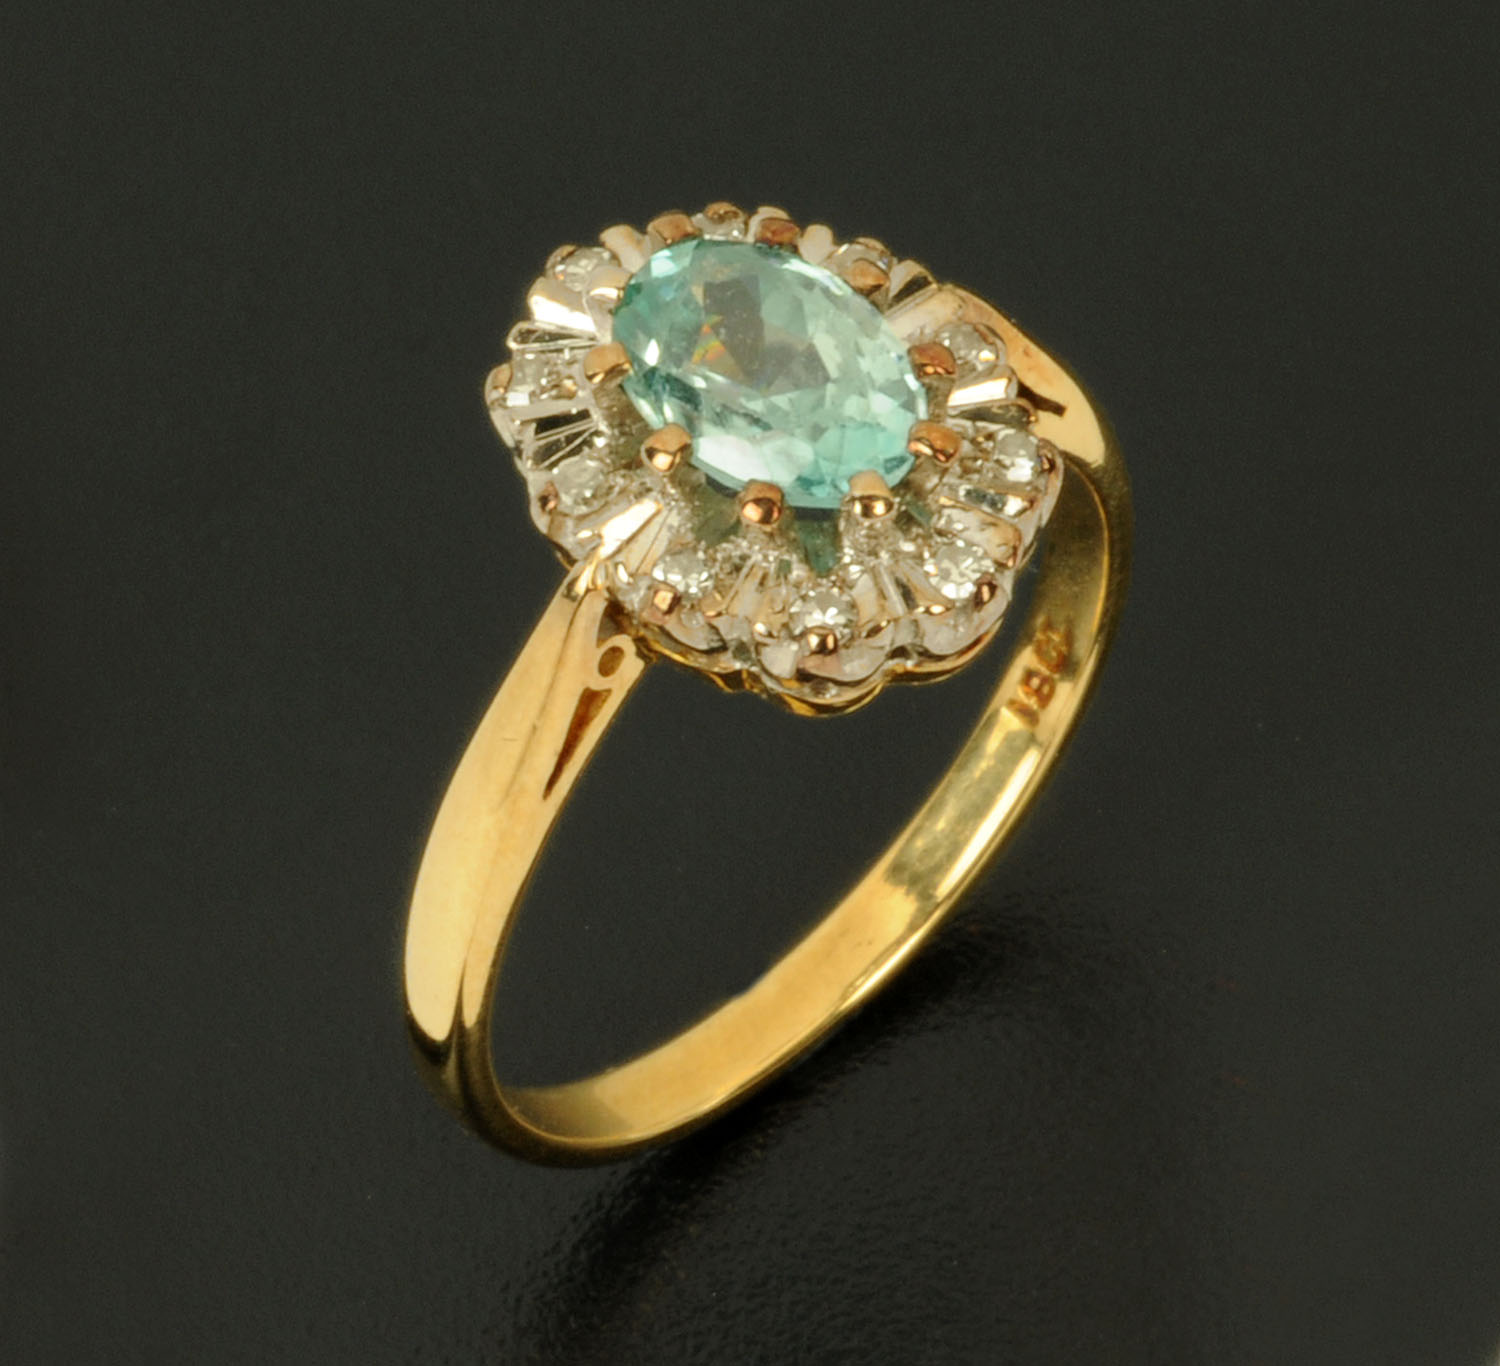 An 18 ct gold aquamarine and diamond cluster ring, oval, stamped "18 ct", size N.